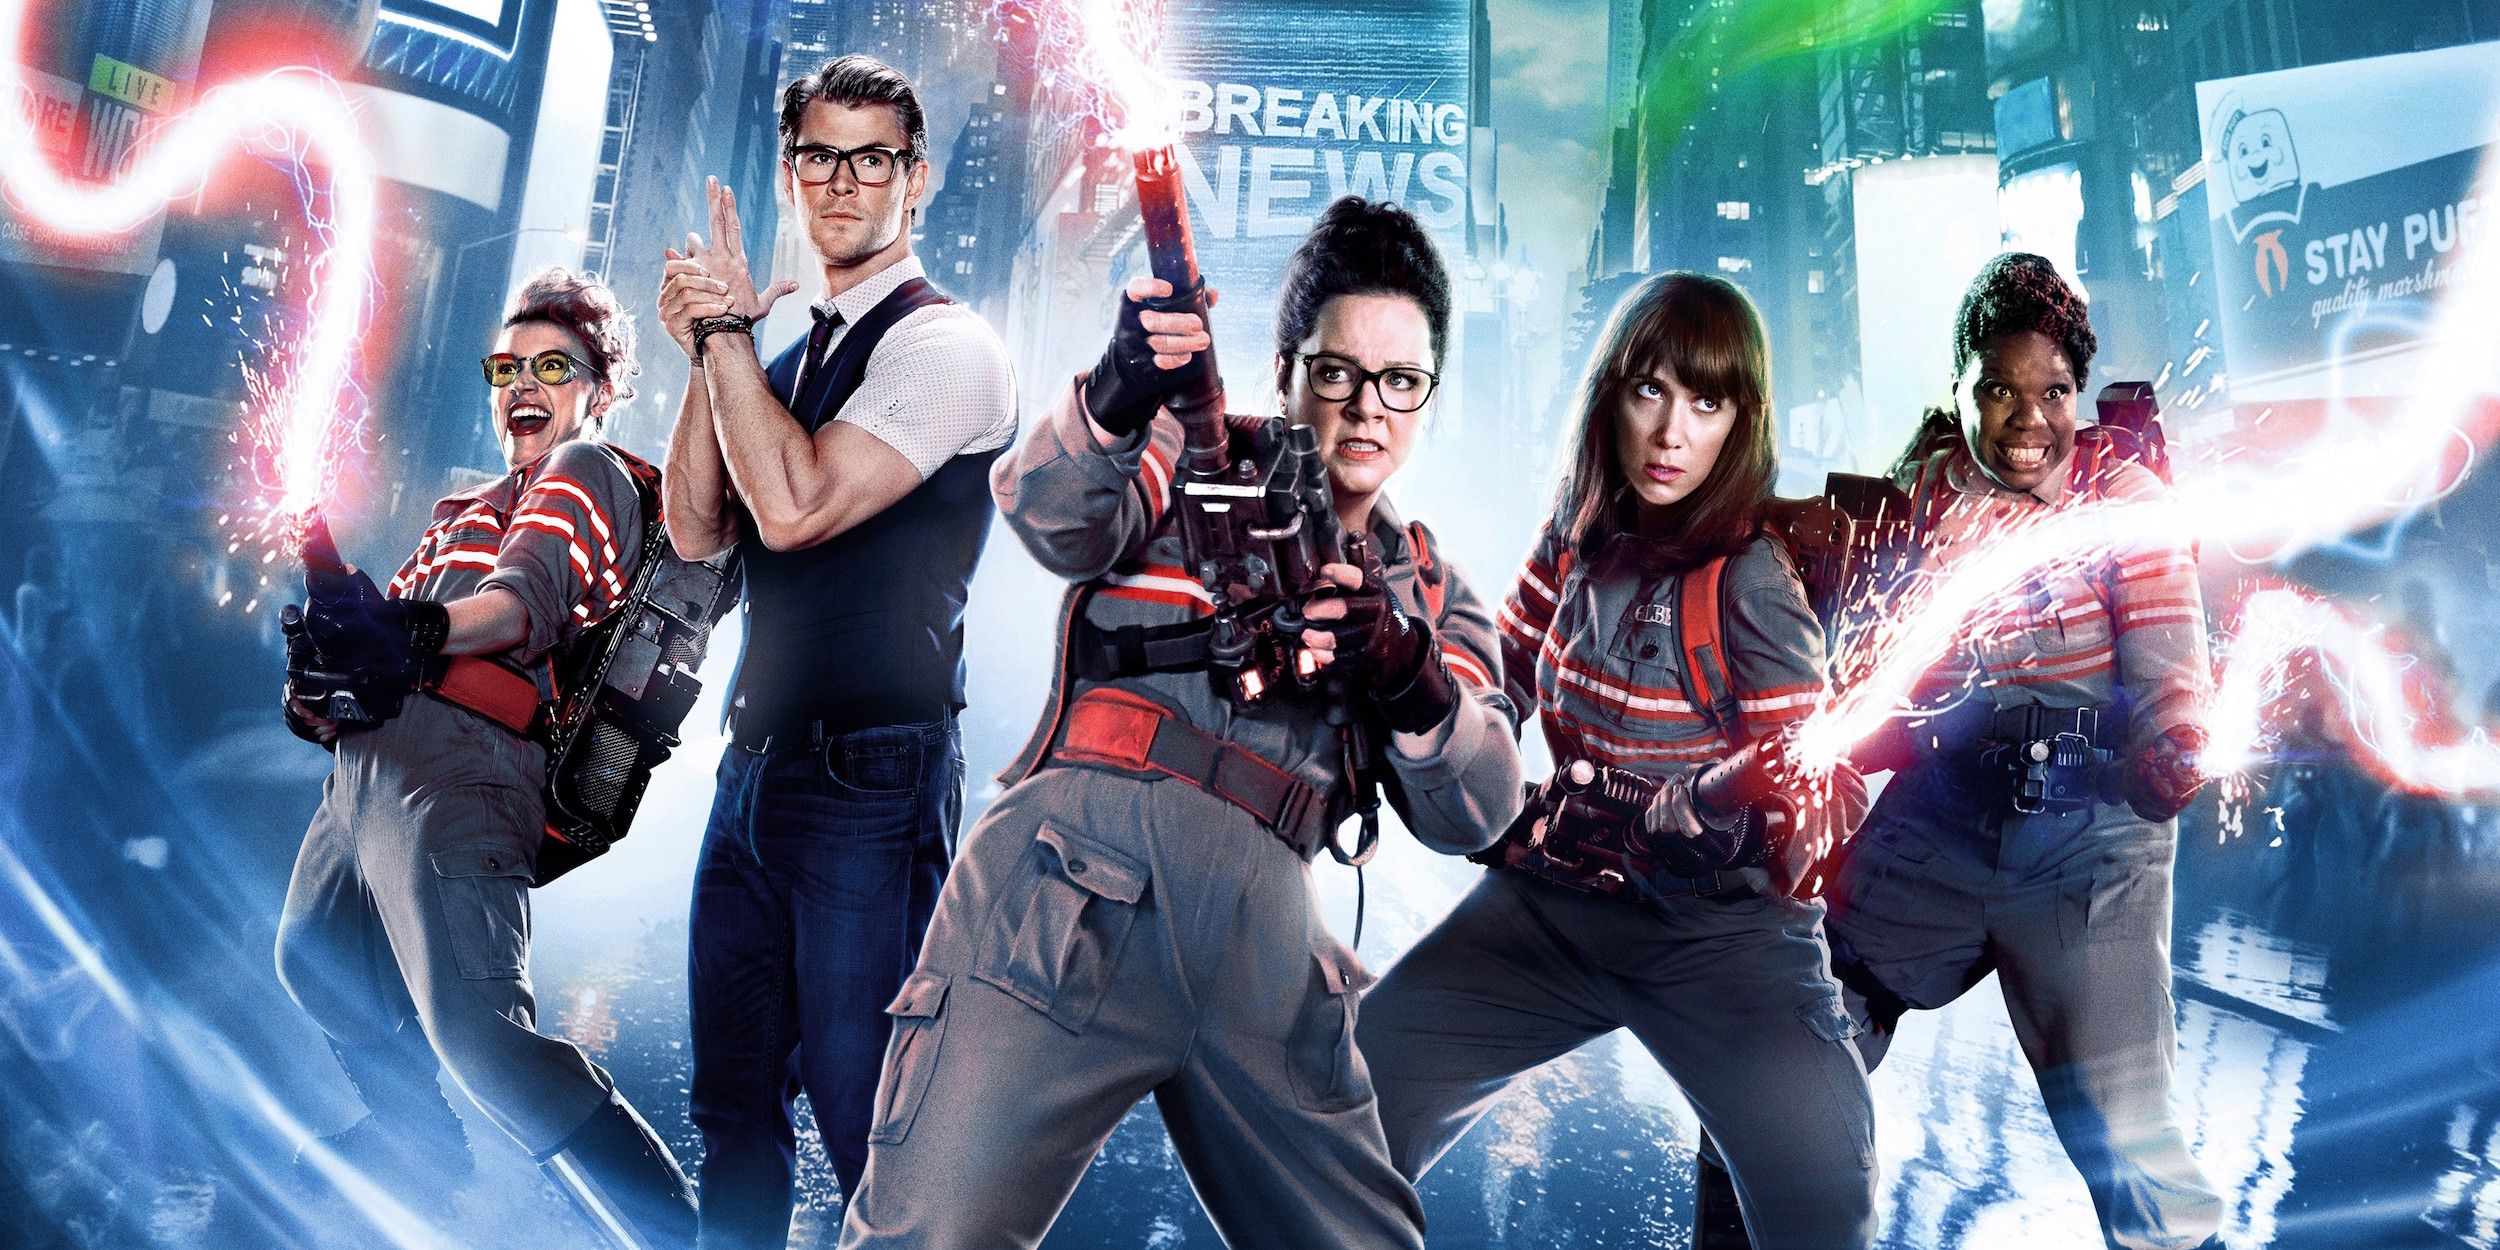 Ghostbusters 2016 Movie (Review)